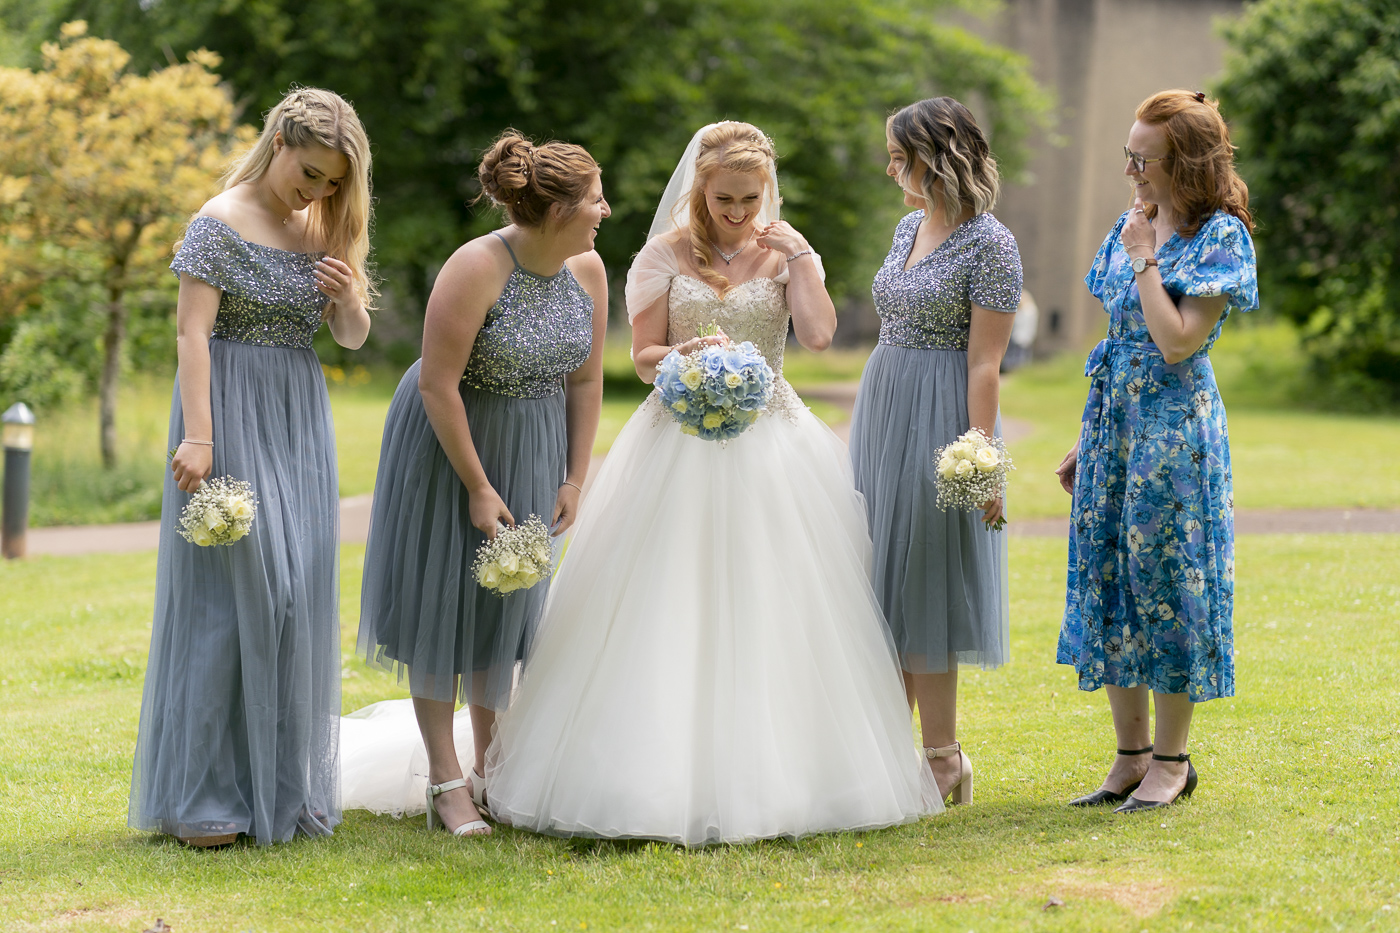 Bride with bridesmaids laughing and joking